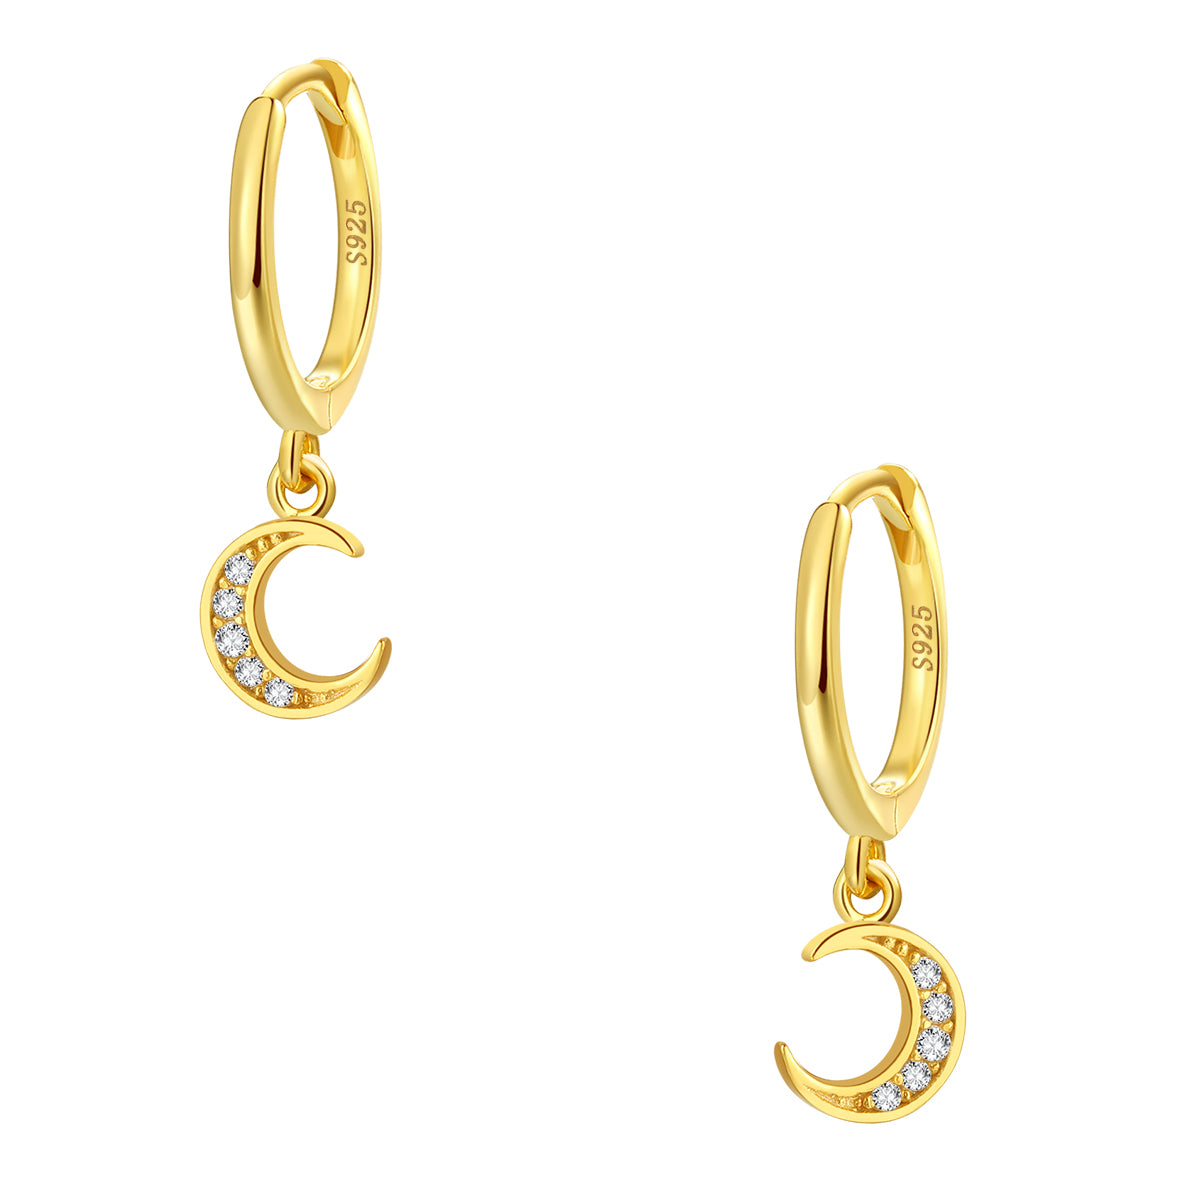 Crescent Moon Huggie Earrings Sterling Silver Gold